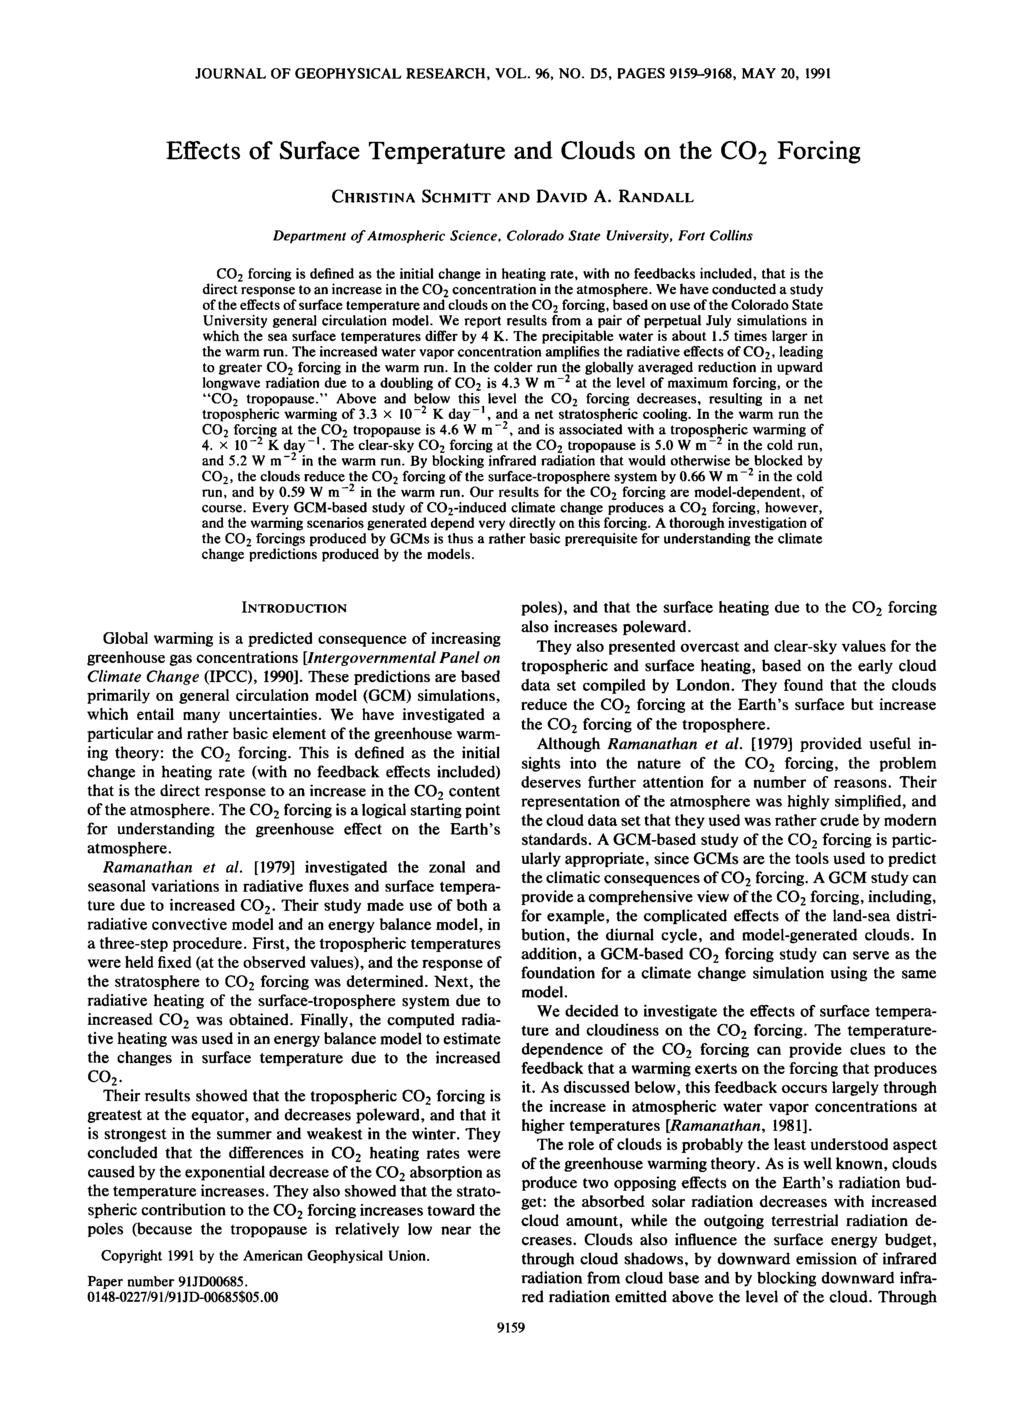 JOURNAL OF GEOPHYSICAL RESEARCH, VOL. 96, NO. D5, PAGES 9159-9168, MAY 20, 1991 Effects of Surface Temperature and Clouds on the CO2 Forcing CHRISTINA SCHMITT AND DAVID A.